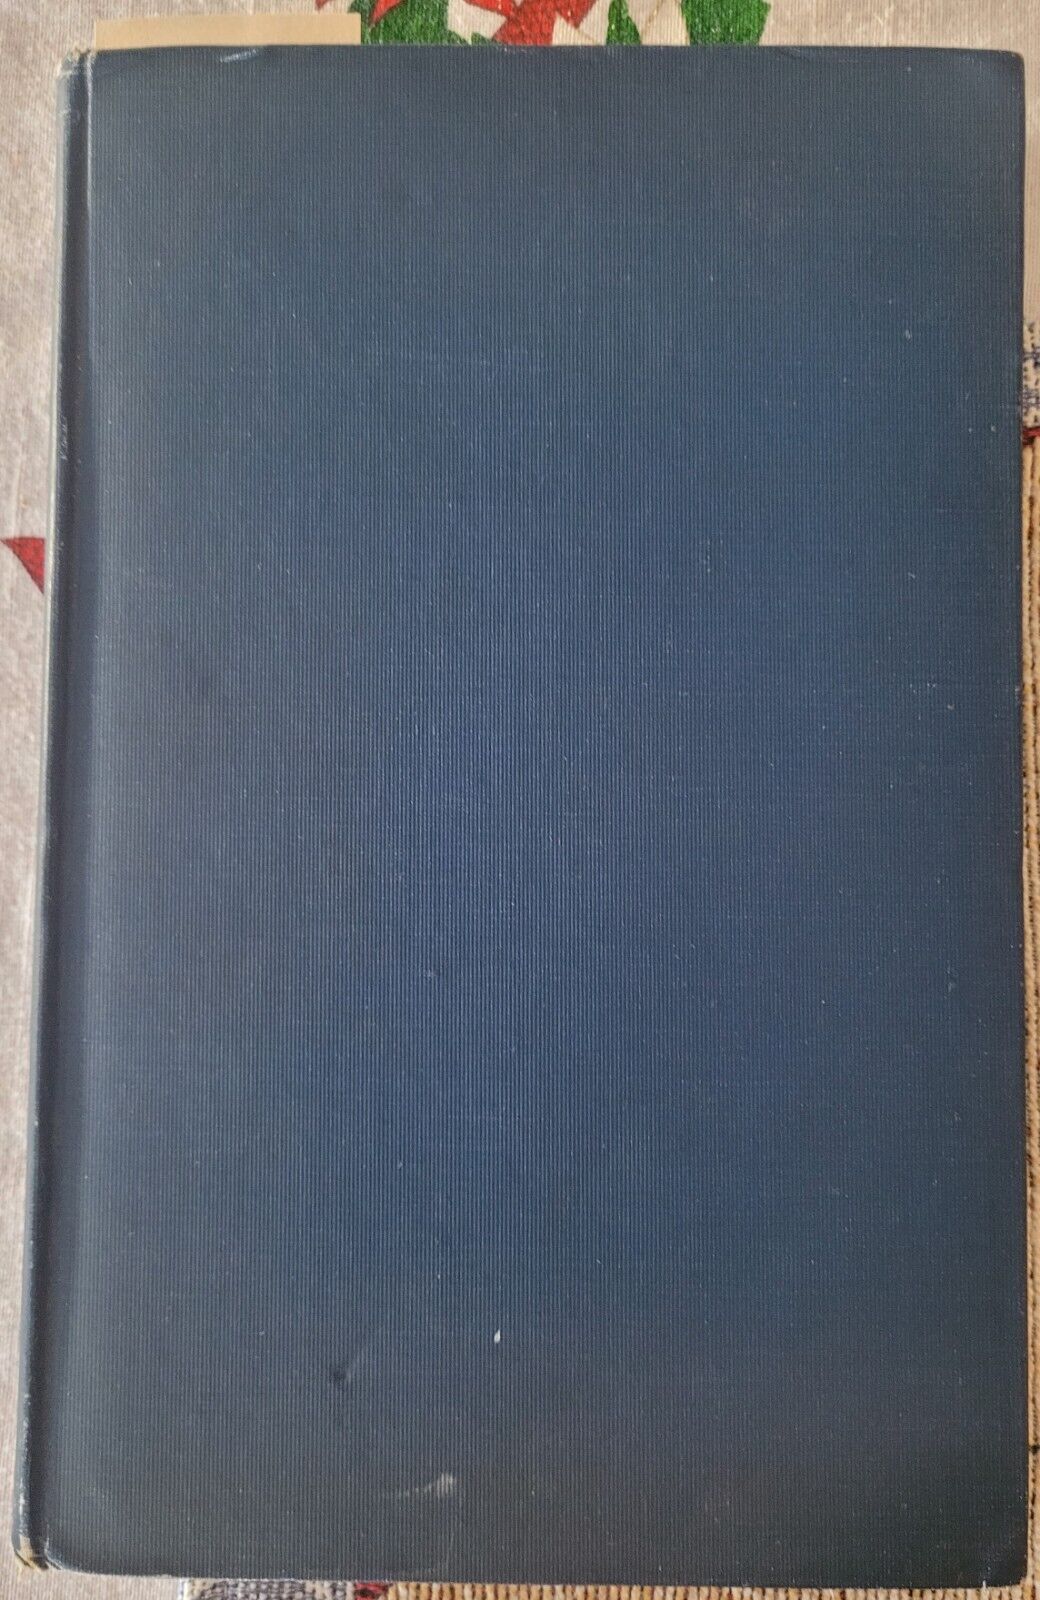 Prisoners of War by Thomas Sturgis printed in 1912.  SIGNED. 